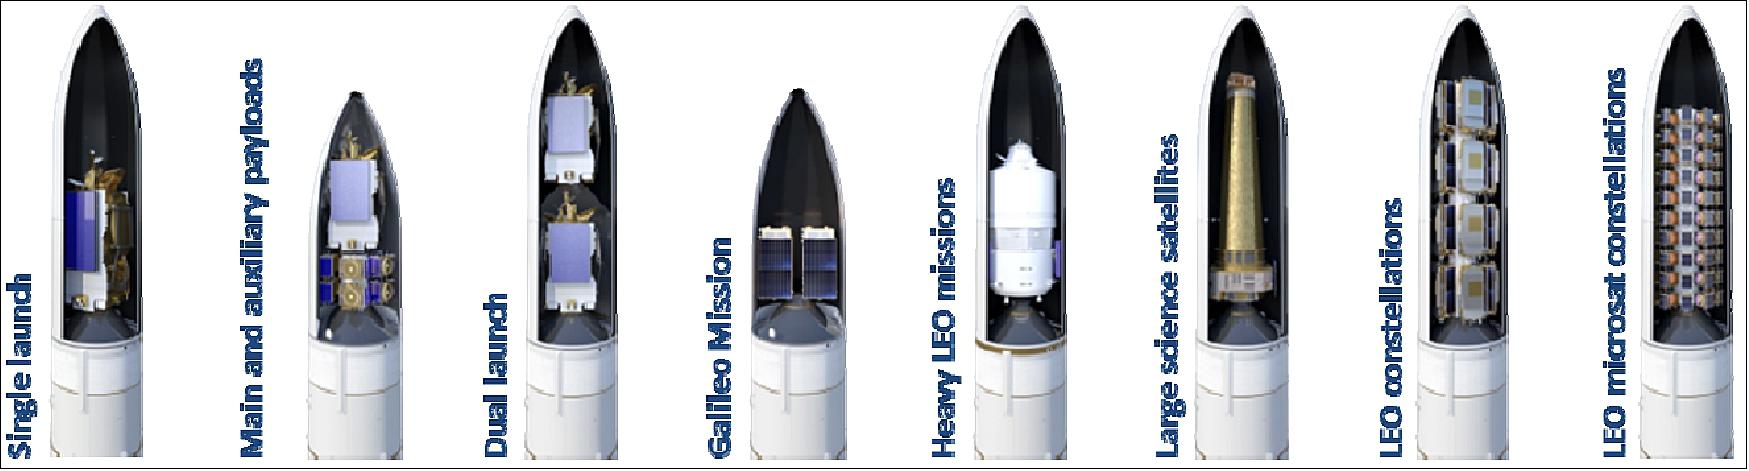 Figure 88: Illustration of Ariane 6 possible missions and configurations (image credit: ArianeGroup)